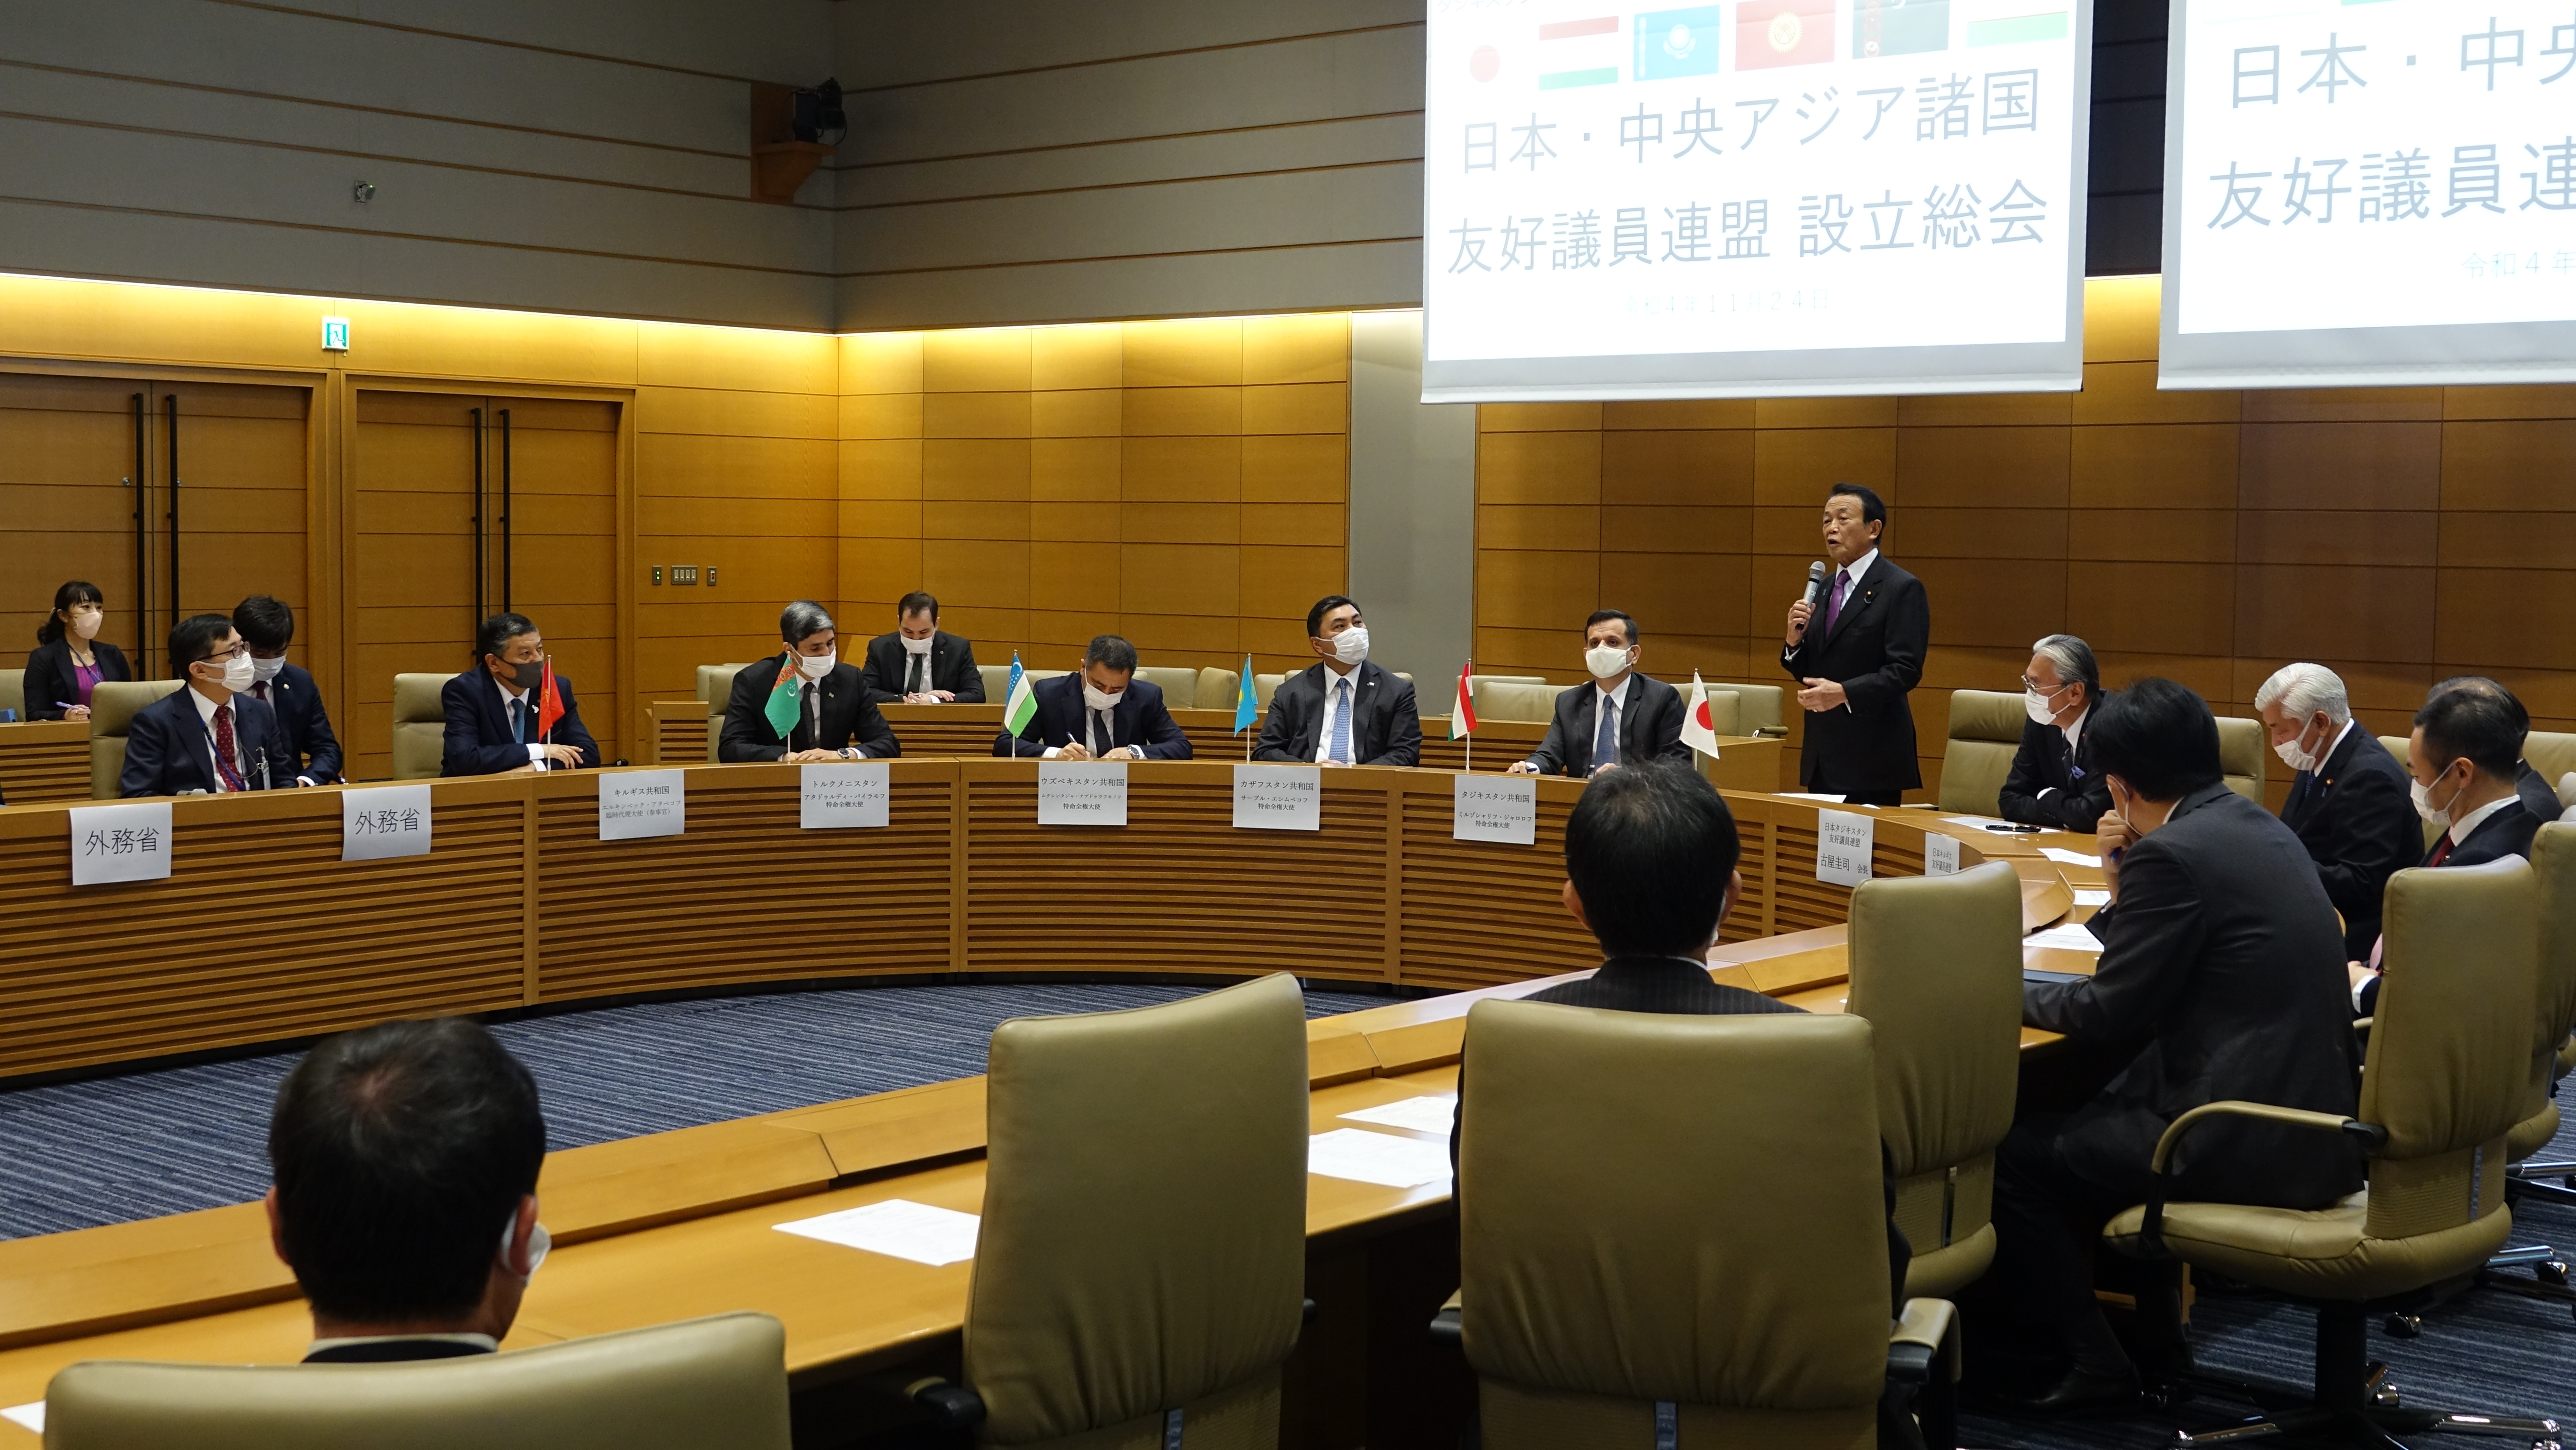 Parliamentary League of Friendship with the Central Asian countries was established at the Japanese Parliament